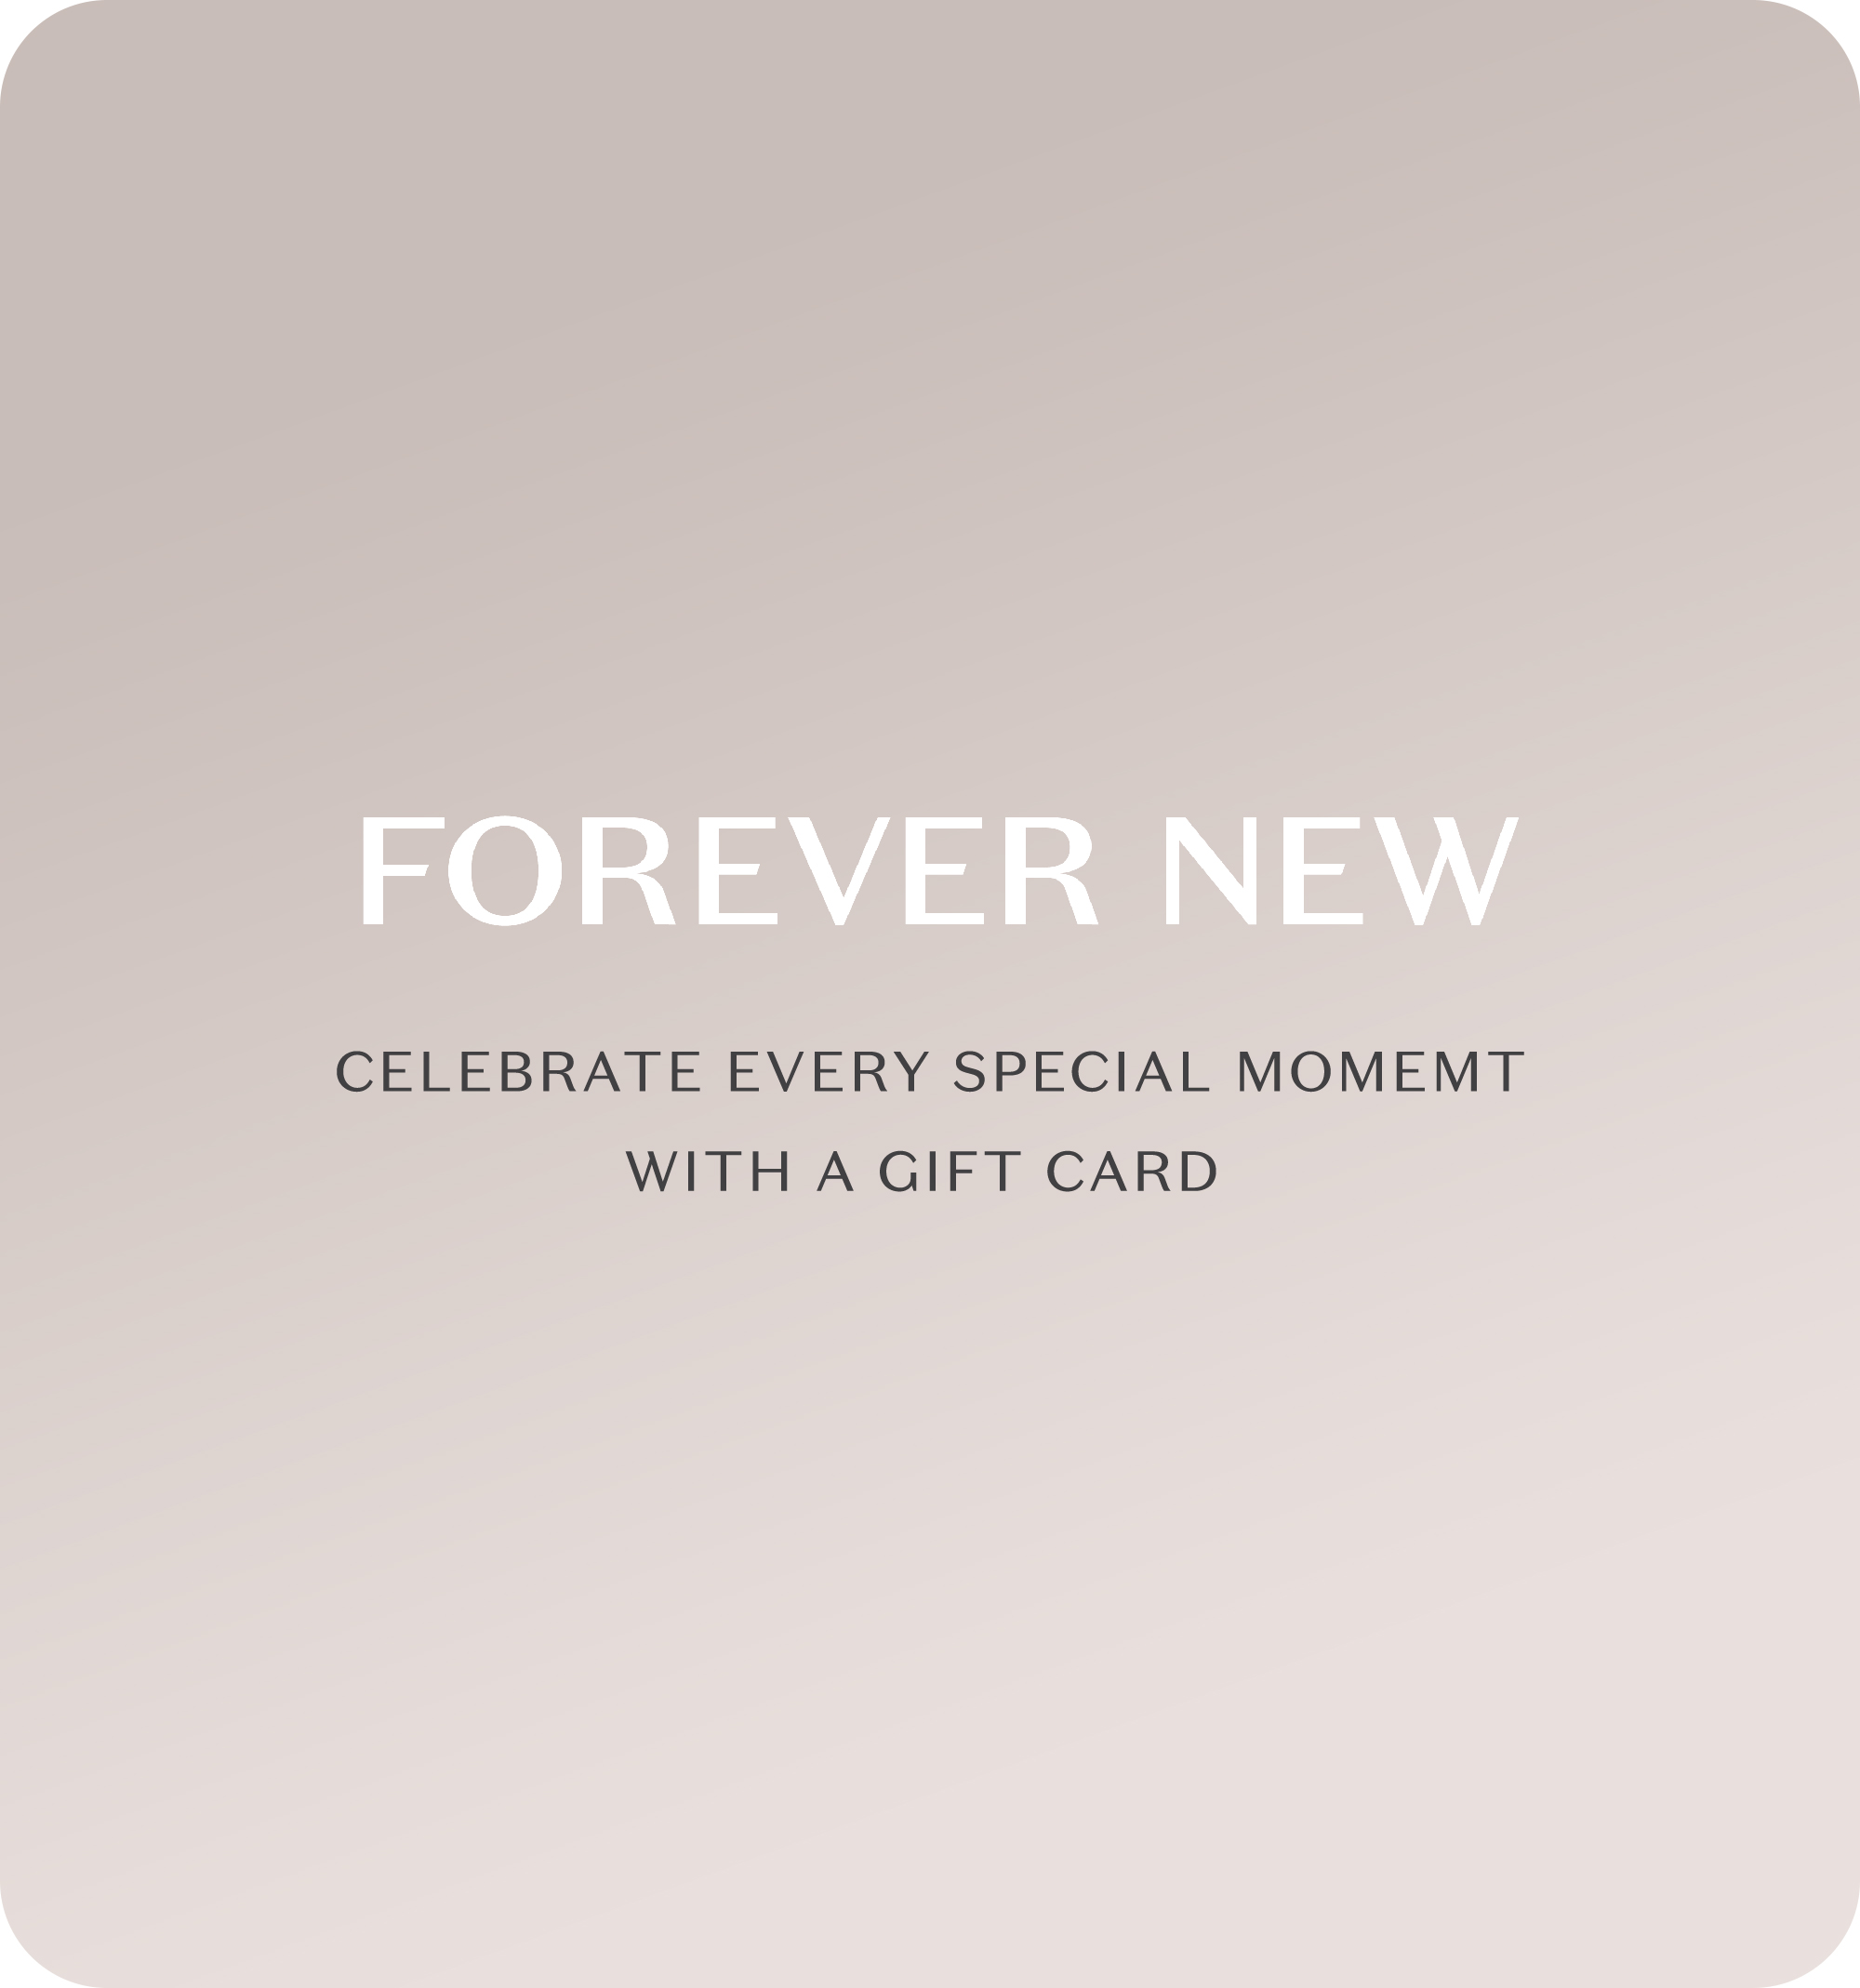 Become a Forever New Allure Member